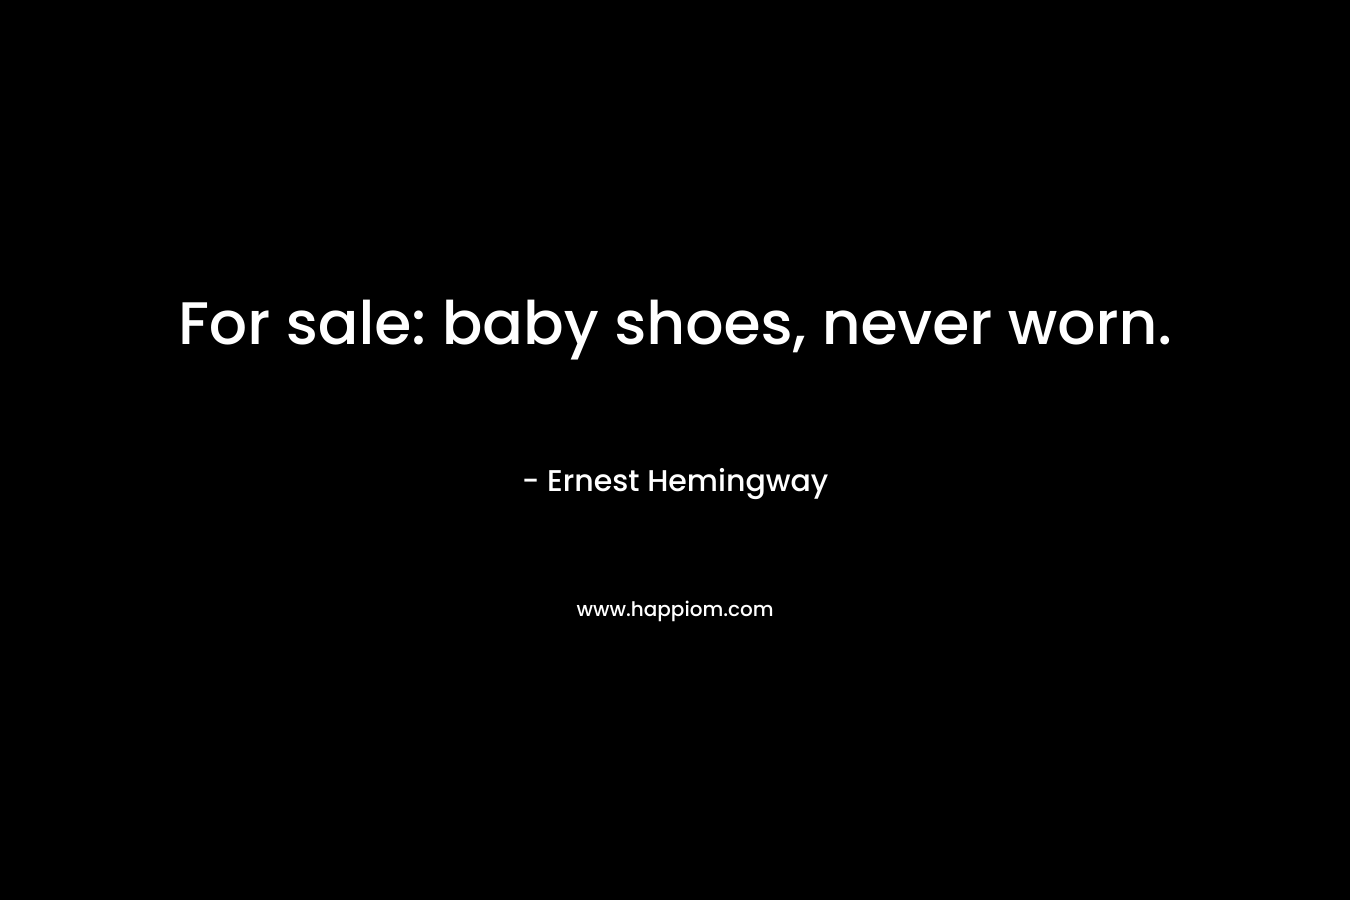 For sale: baby shoes, never worn. – Ernest Hemingway